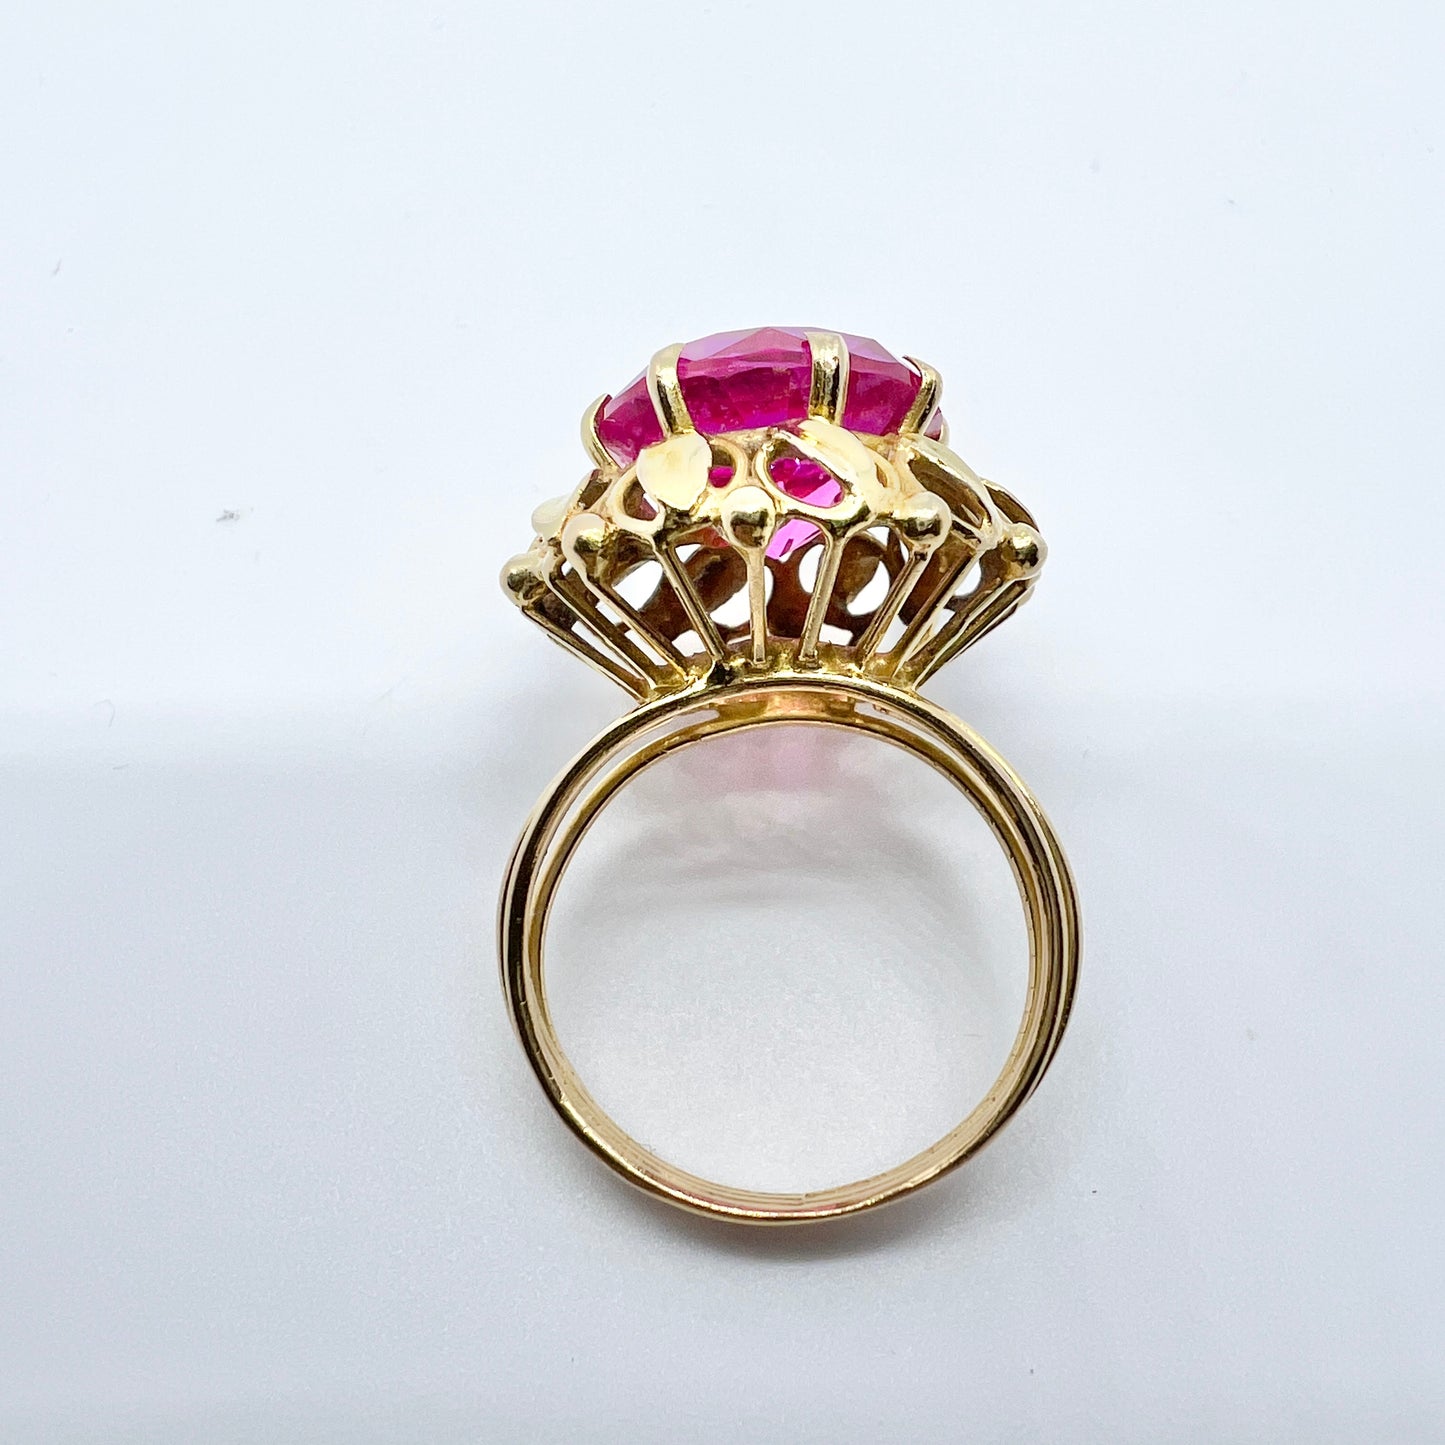 Vintage 14k Gold Synthetic Pink Sapphire Ring. Possibly Lebanon.